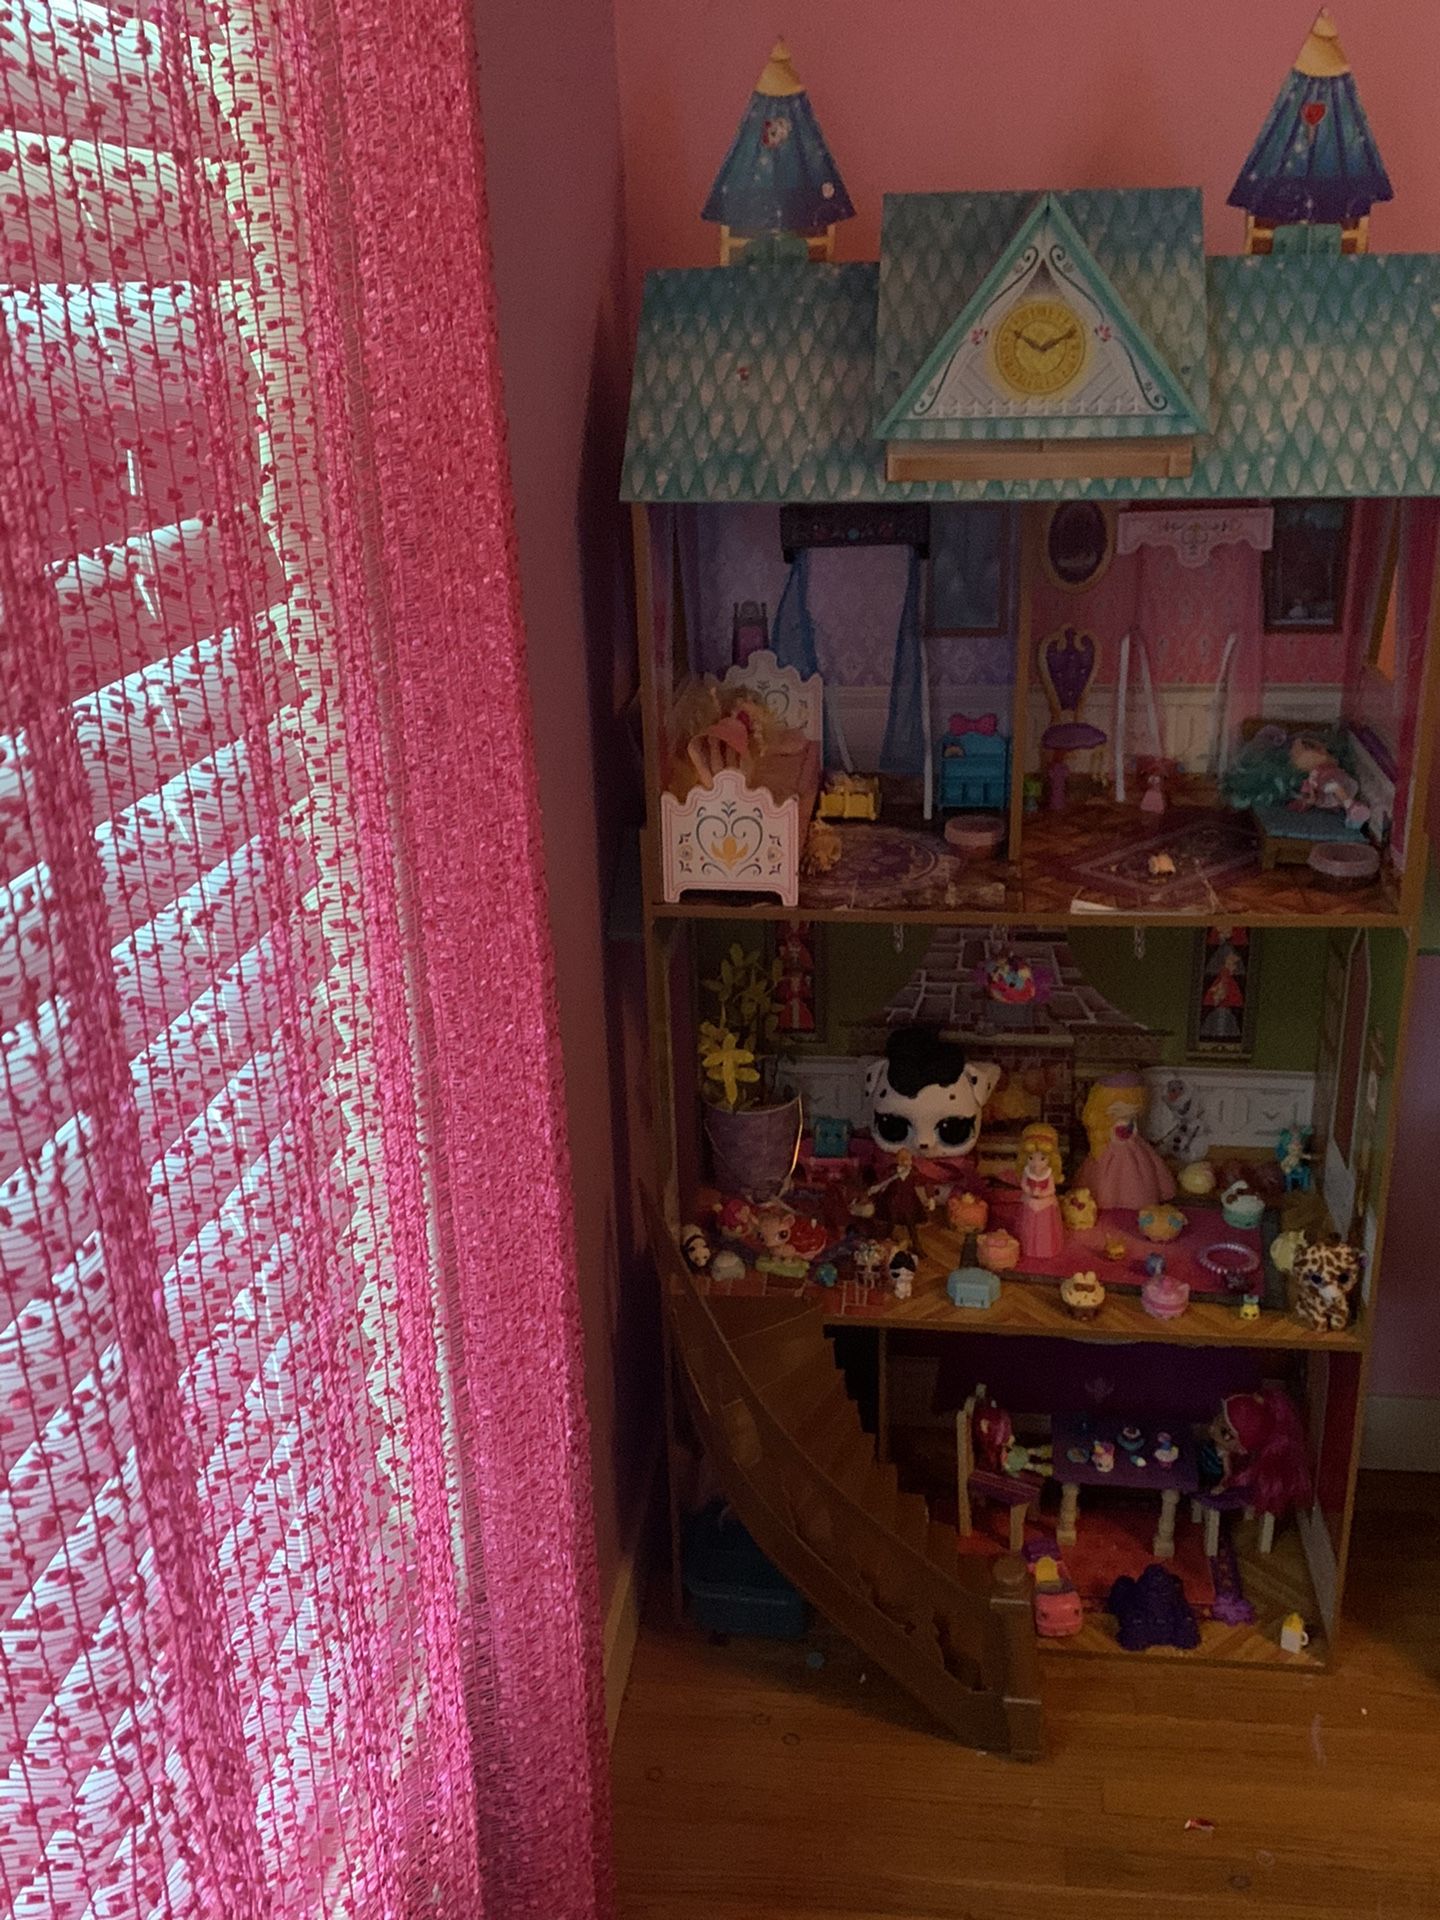 Doll house and toys